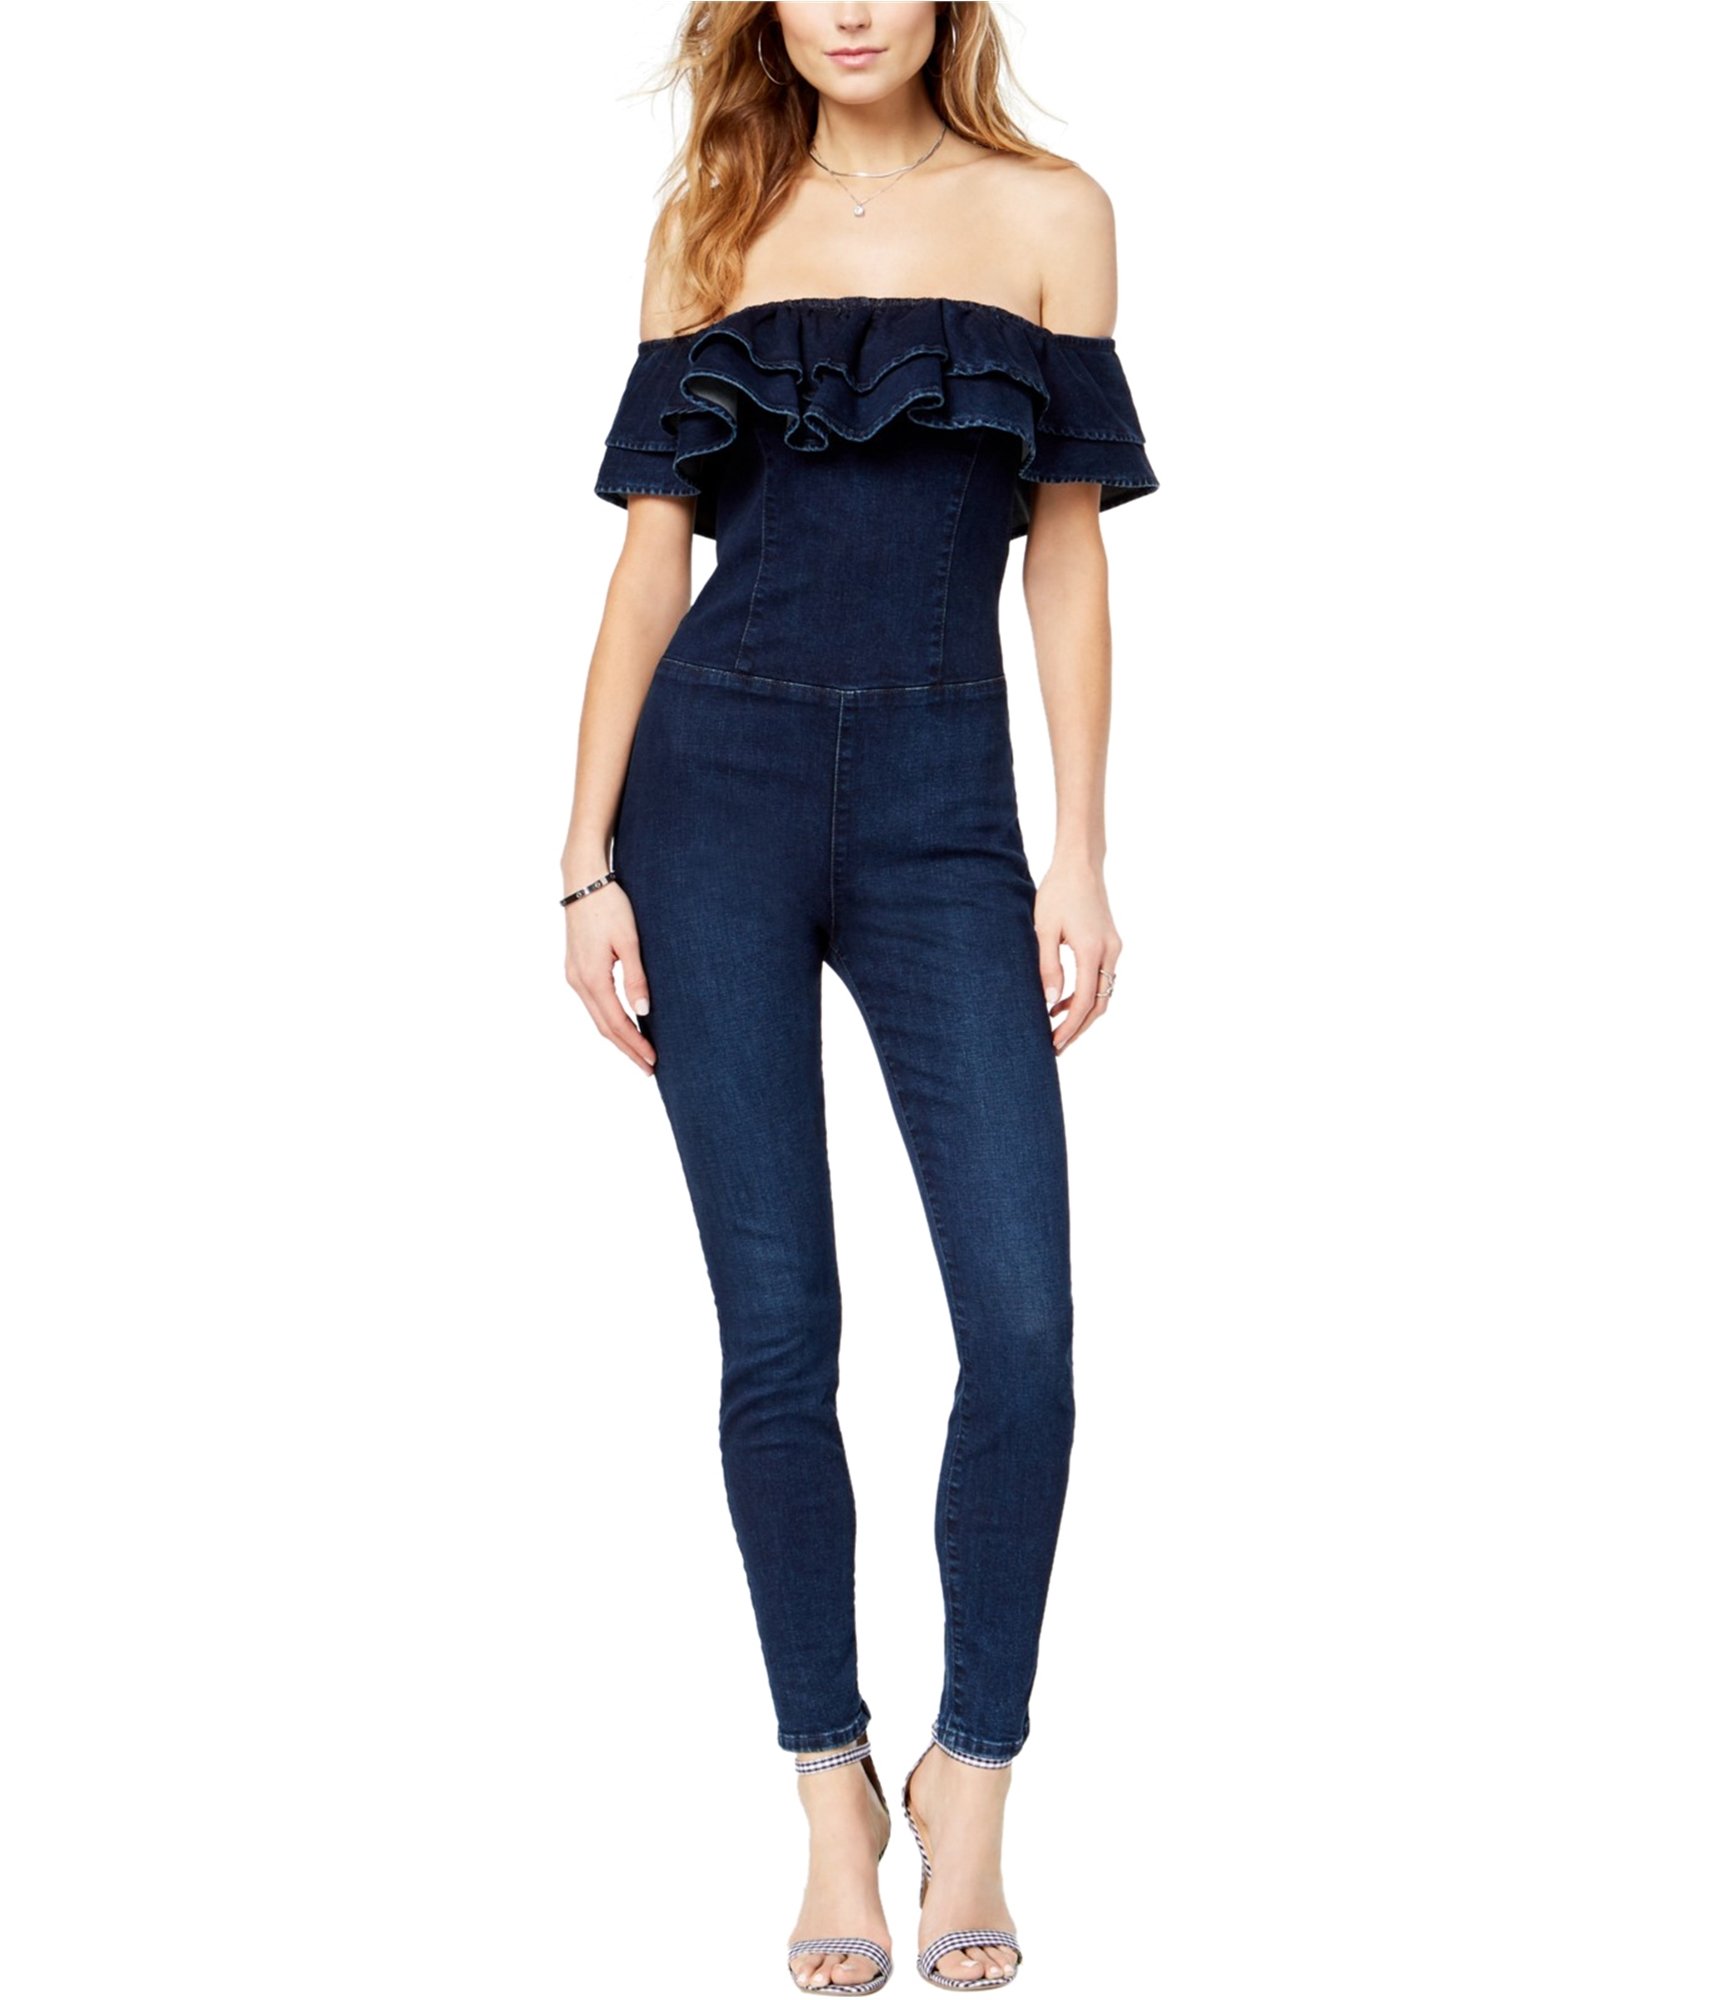 Guess Denim Stretch Overall Jumpsuit - Women's Rompers/Jumpsuits in Rinse |  Buckle